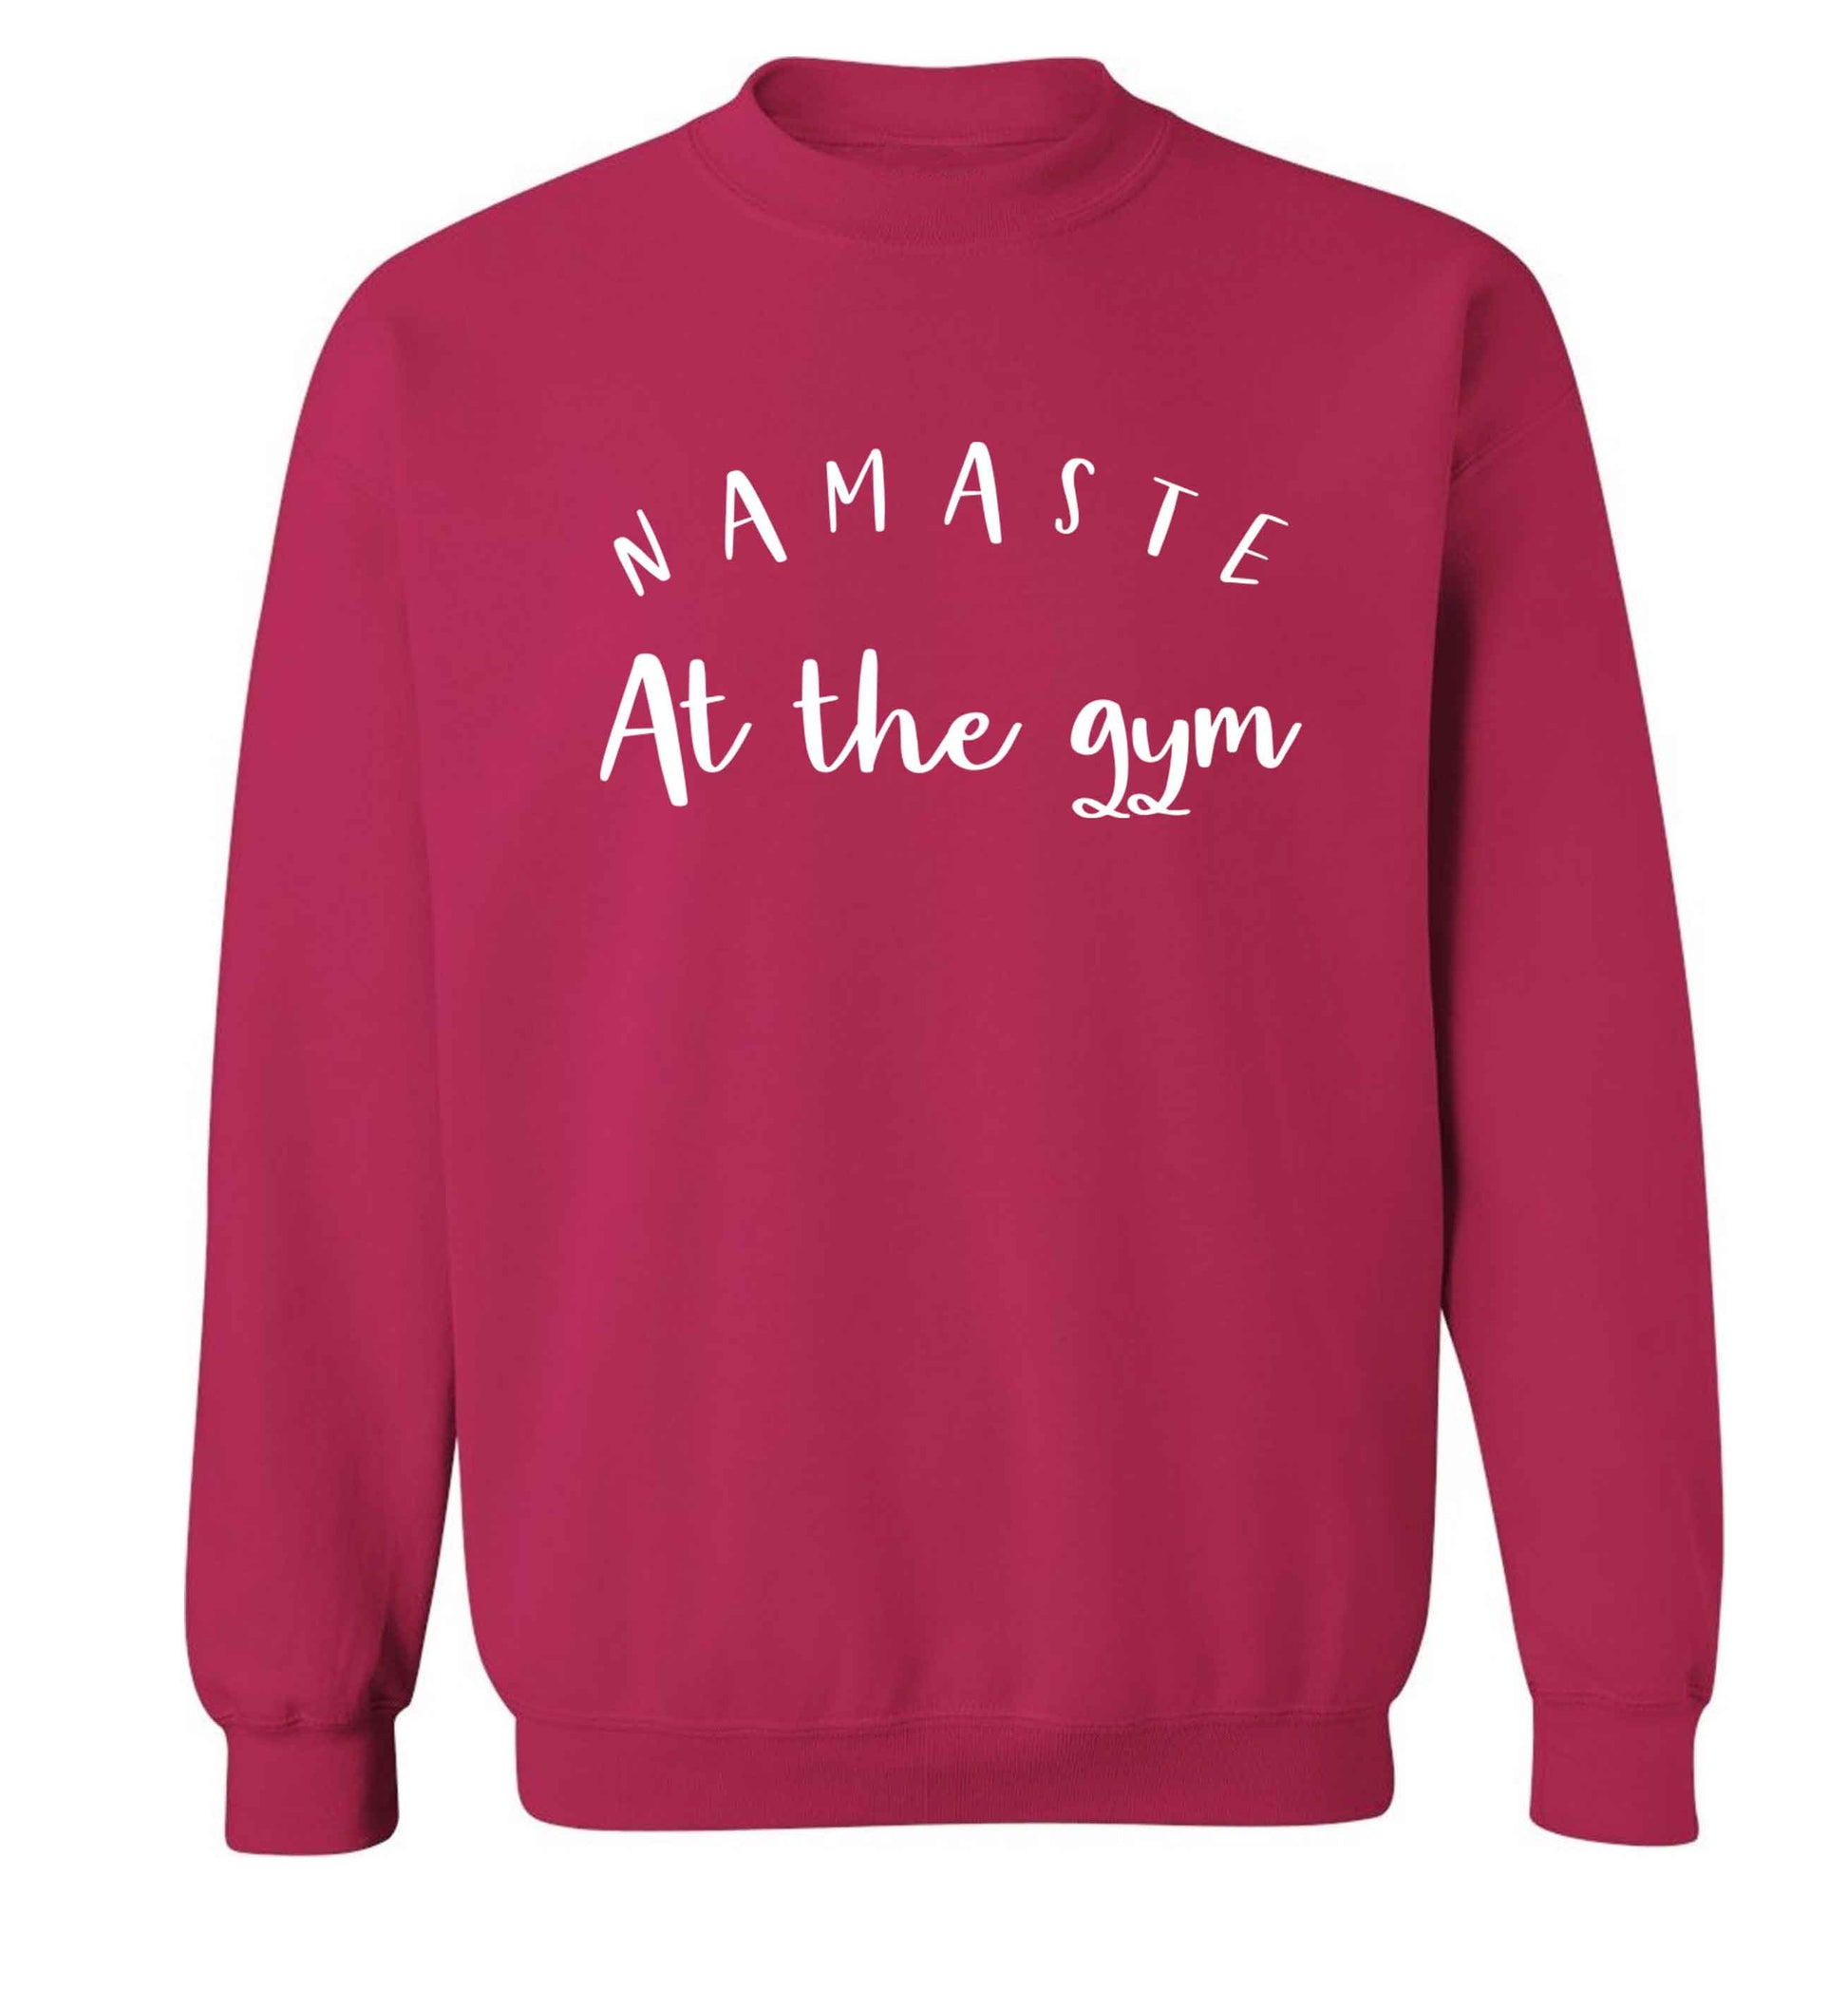 Namaste at the gym Adult's unisex pink Sweater 2XL